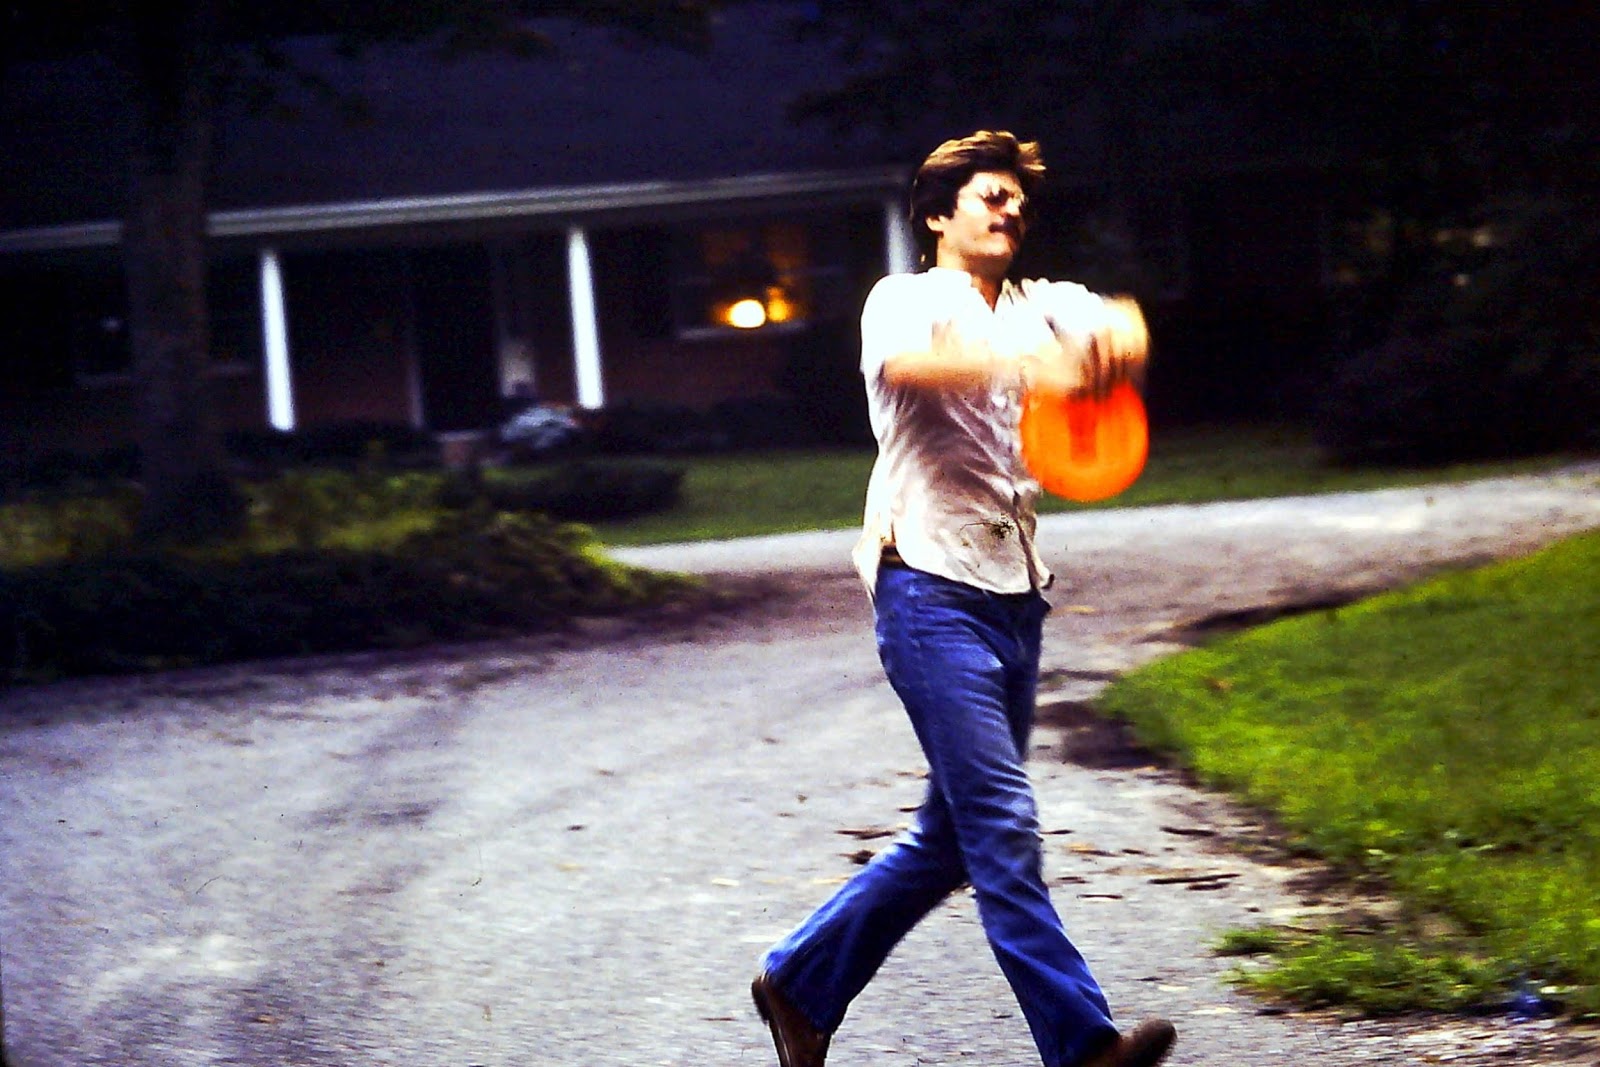 playing frisbee, 1970s, shared with permission. 